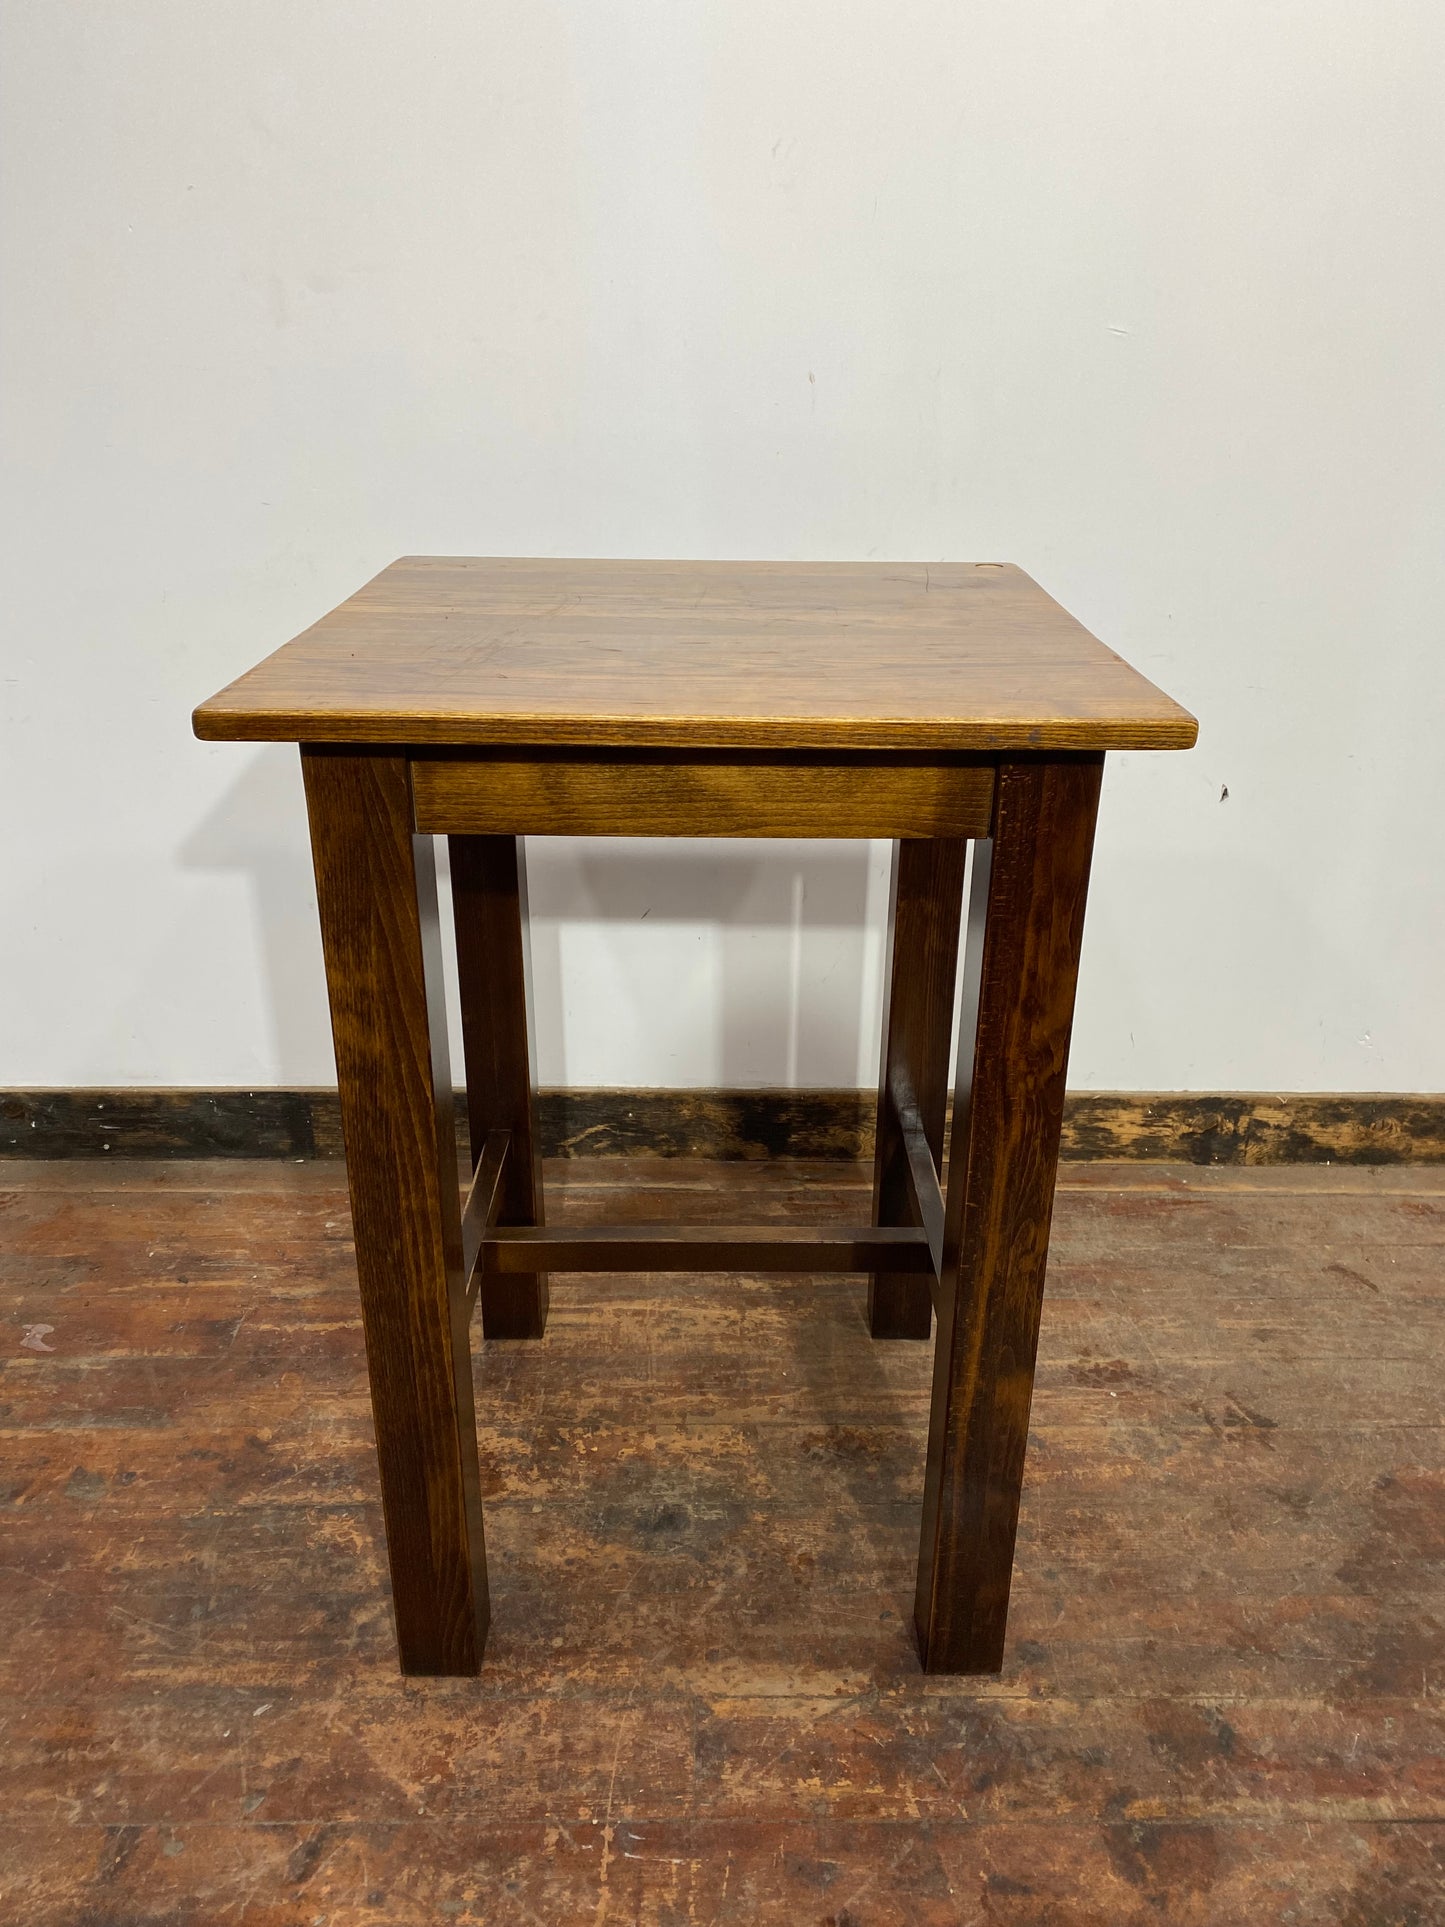 Traditional high/poseur table